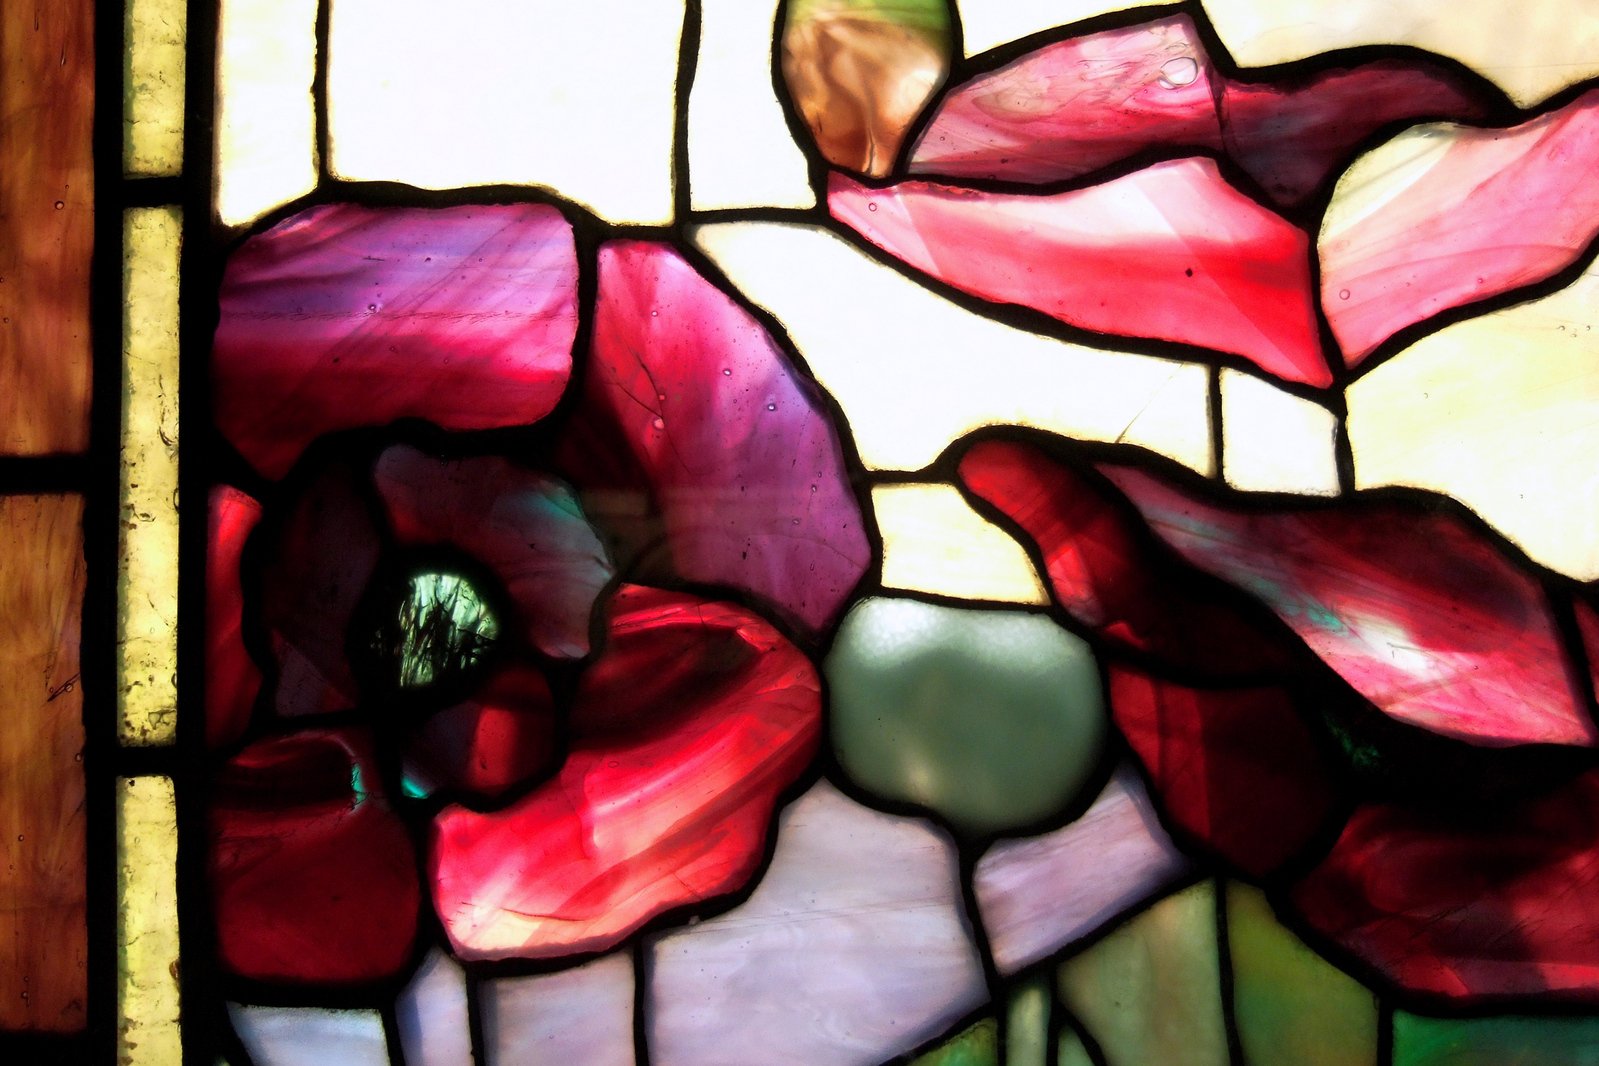 the large flower is depicted in this stained glass